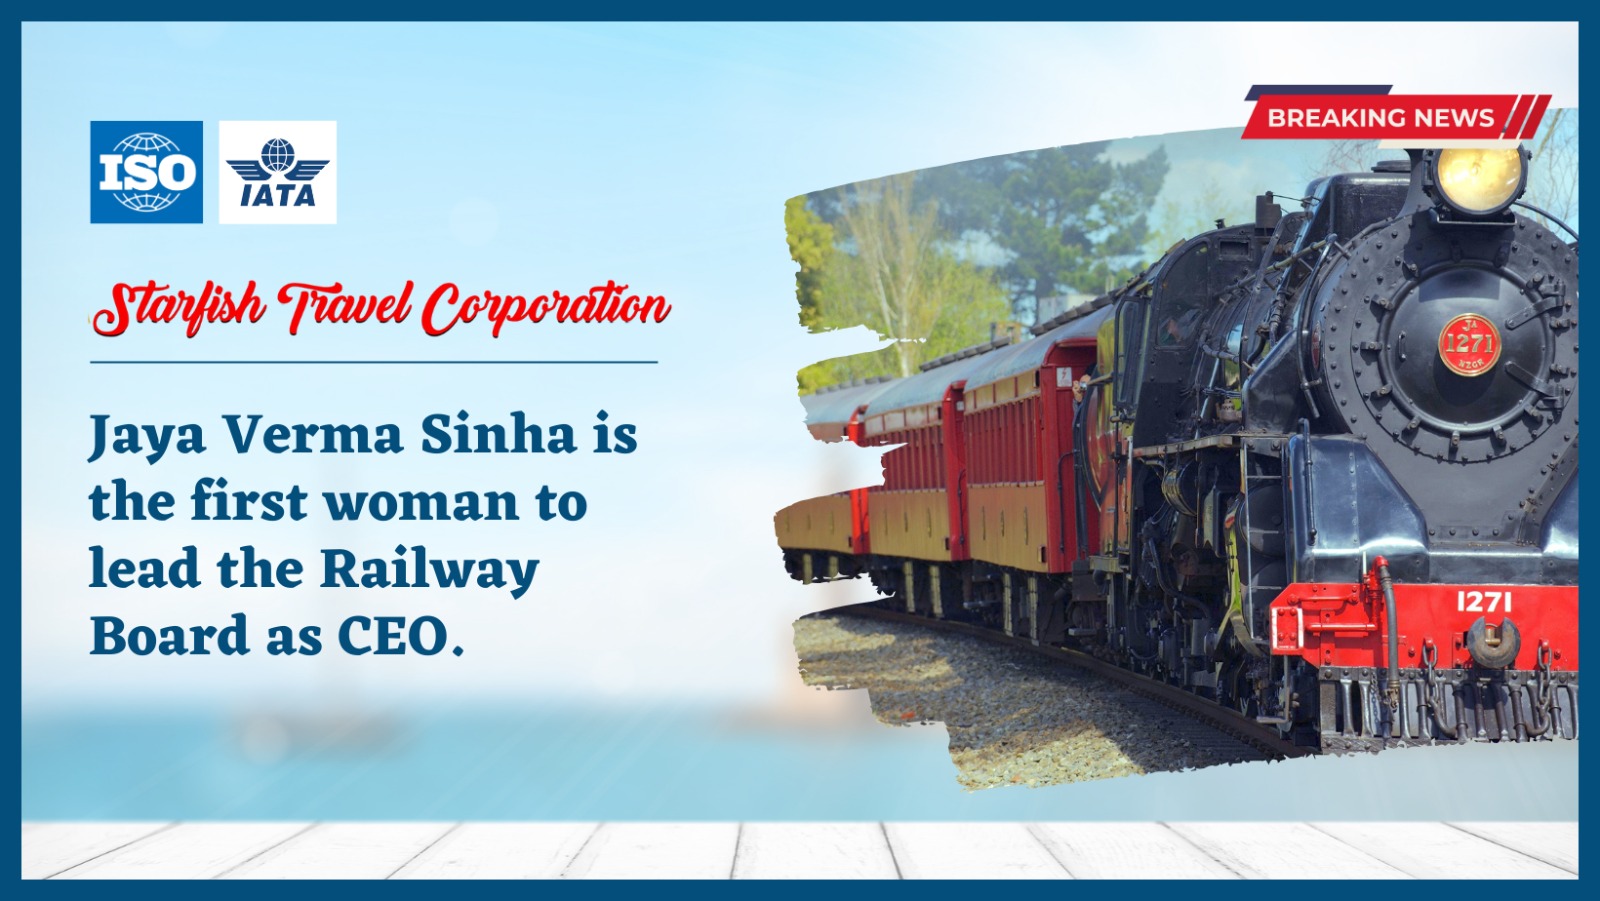 Jaya Verma Sinha is the first woman to lead the Railway Board as CEO.